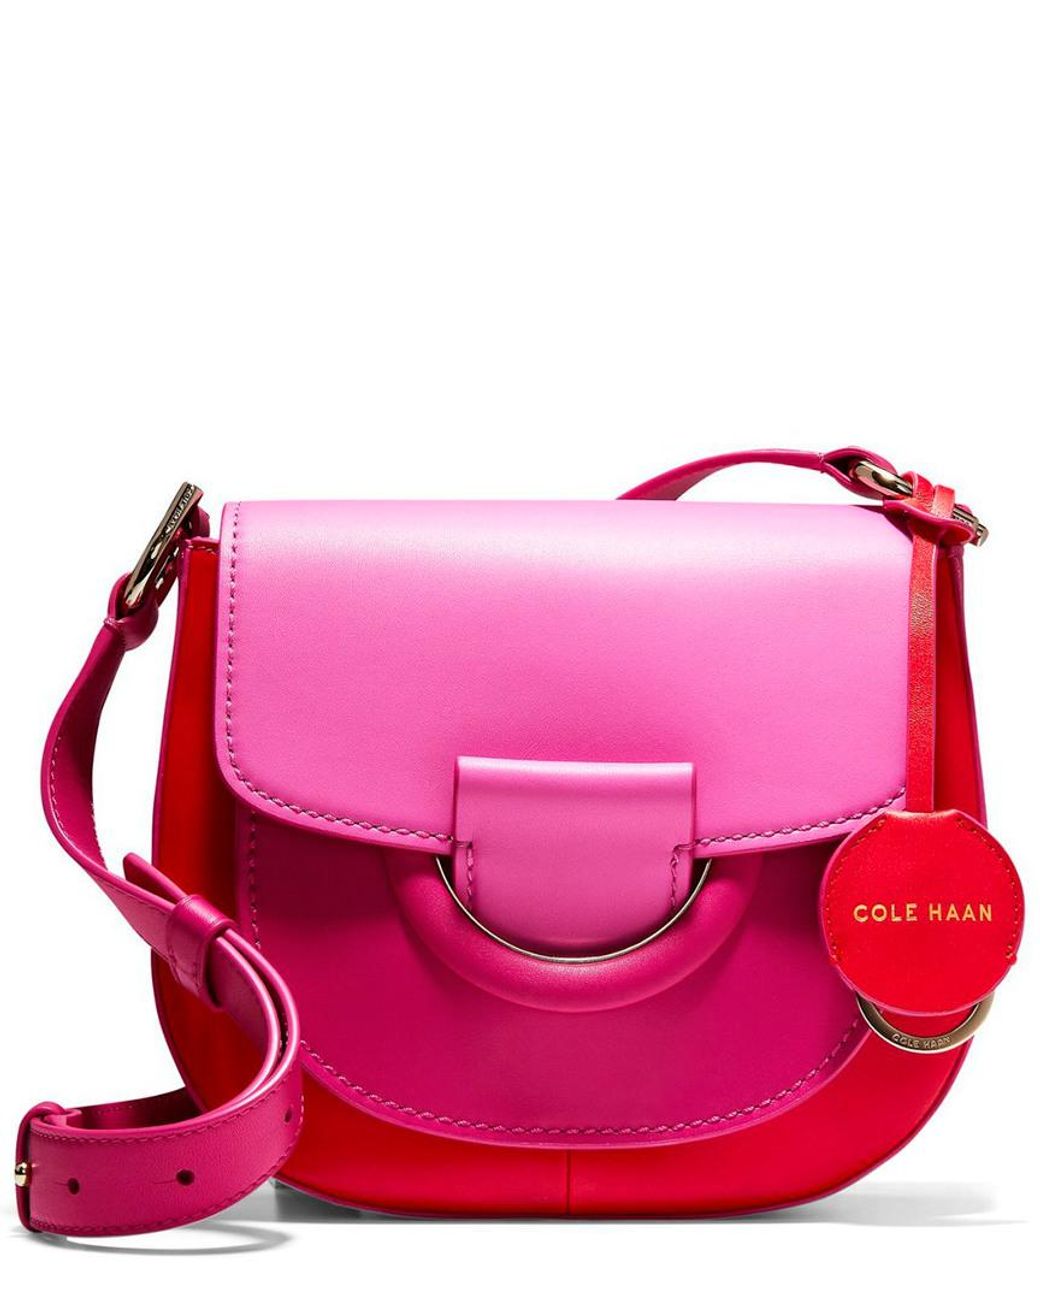 Cole Haan Grand Ambition Colorblocked Leather Crossbody in Pink | Lyst